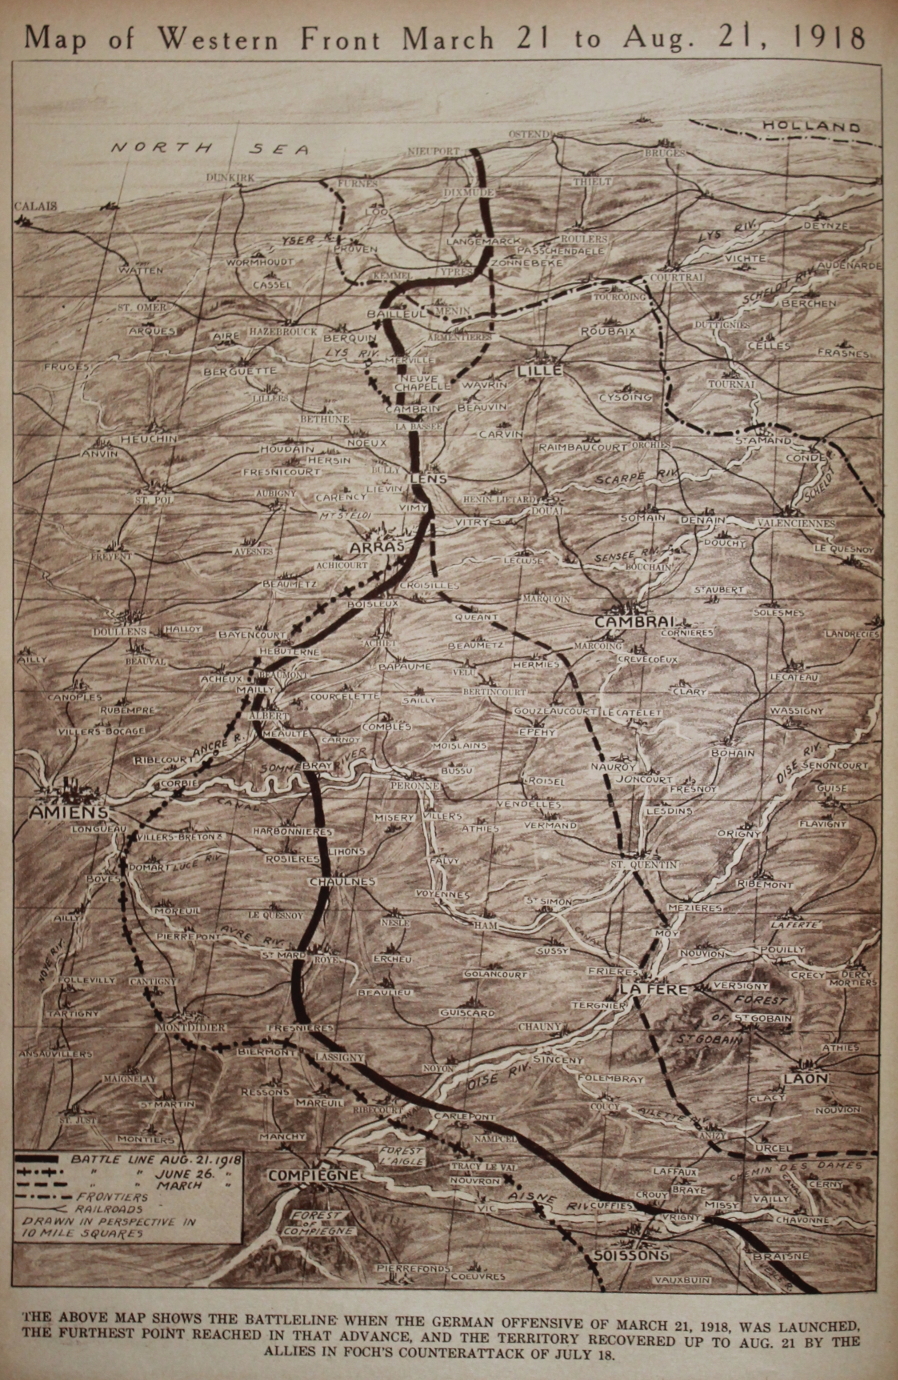 Map of the Northwestern Front from March 21 to August 21, 1918. Despite the caption, the map shows primarily the German offensives against the British sector, Operations Michael and Georgette. From %i1%The War of the Nations Portfolio in Rotogravure Etchings%i0%.
Text:
The above map shows the battleline when the German offensive of March 21, 1918 was launched, the furthest point reached in that advance, and the territory recovered up to August 21 by the Allies in Foch's counterattack of July 18.